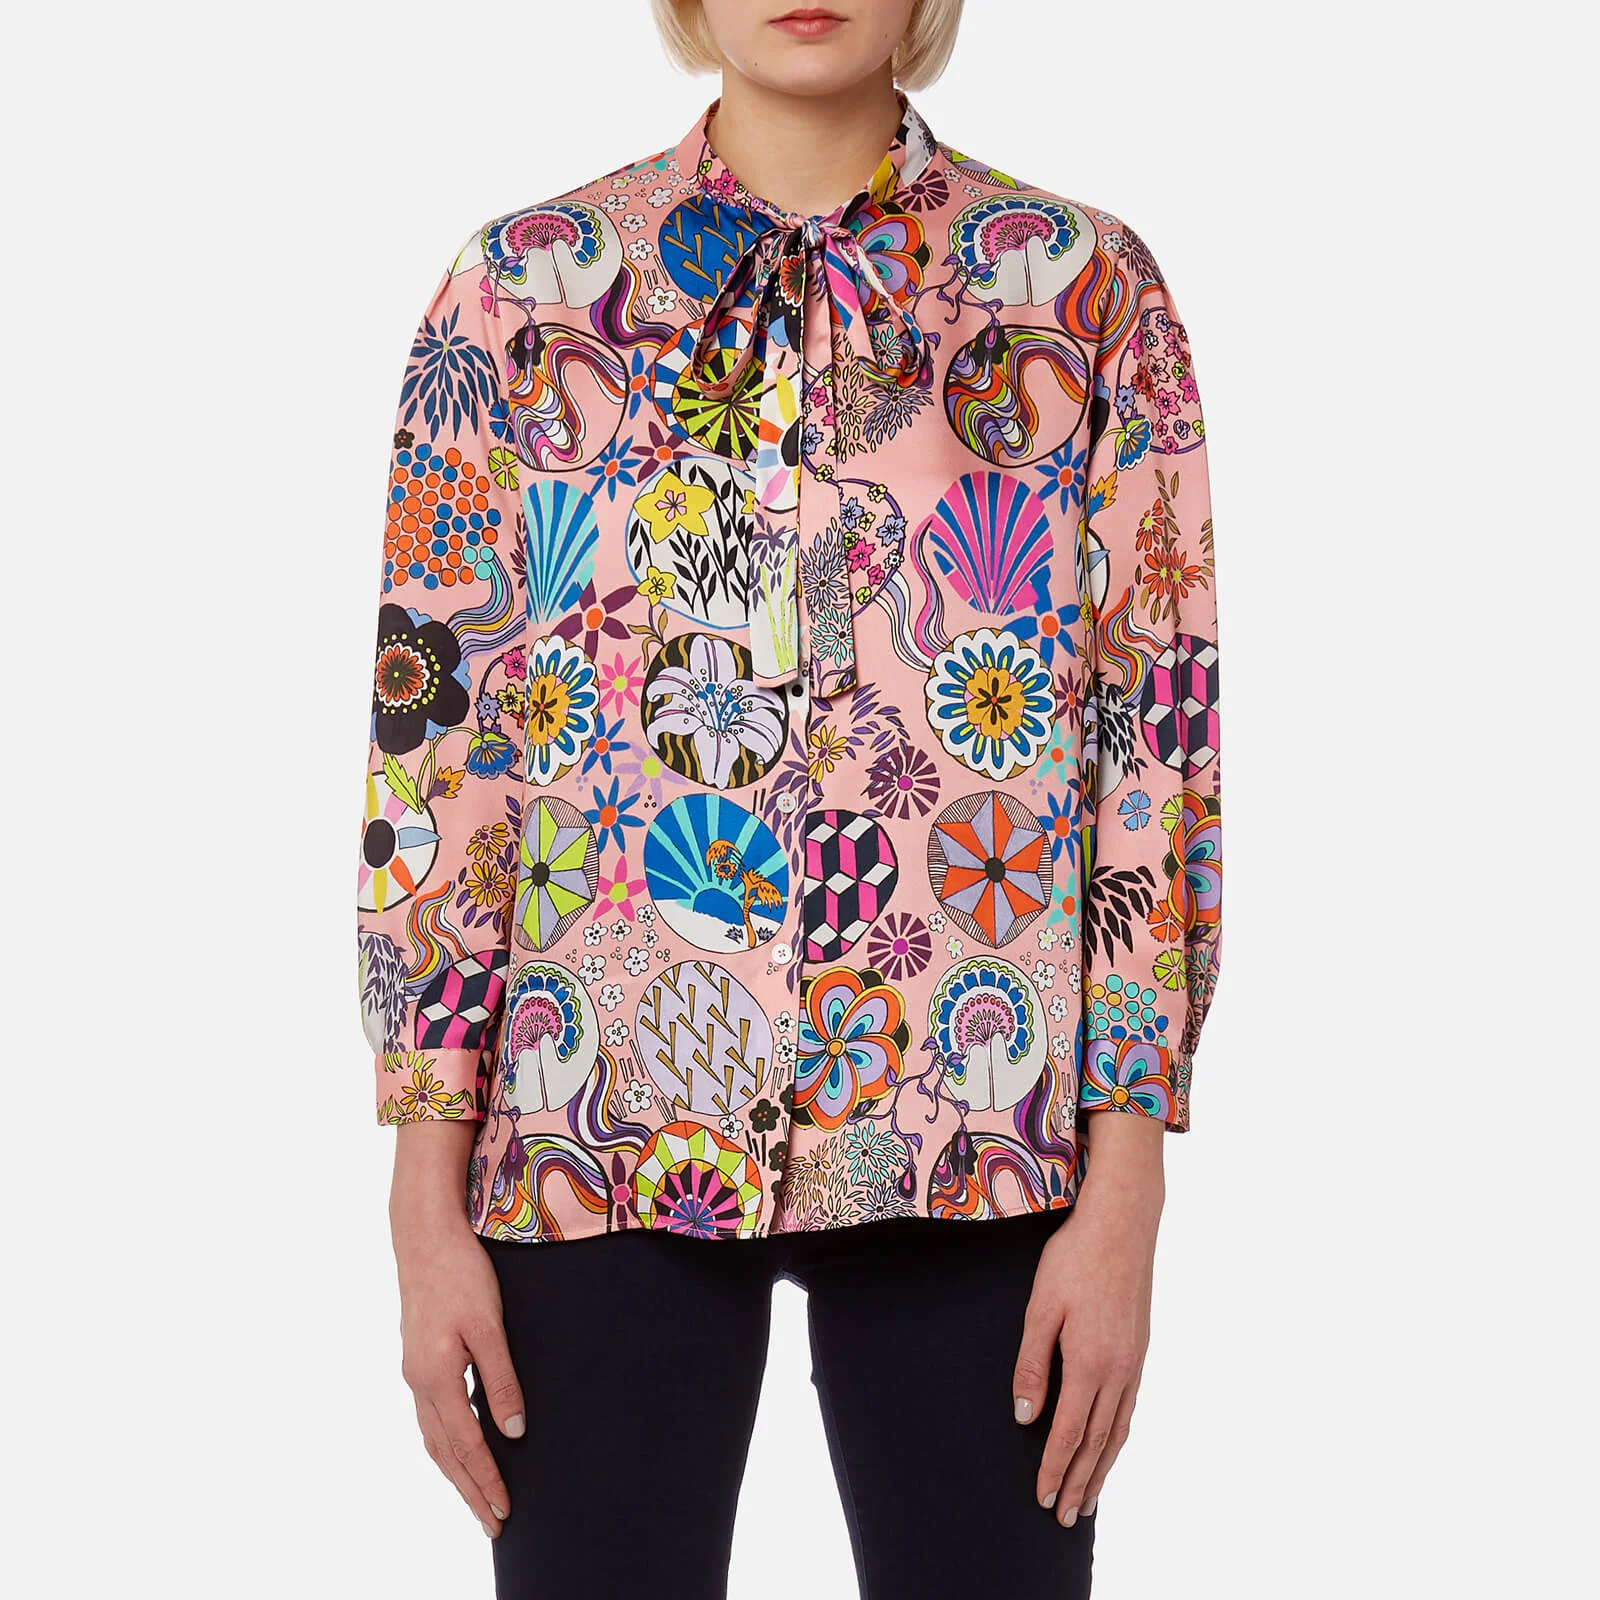 PS by Paul Smith Women's Enso Floral Blouse - Powder Pink Image 1